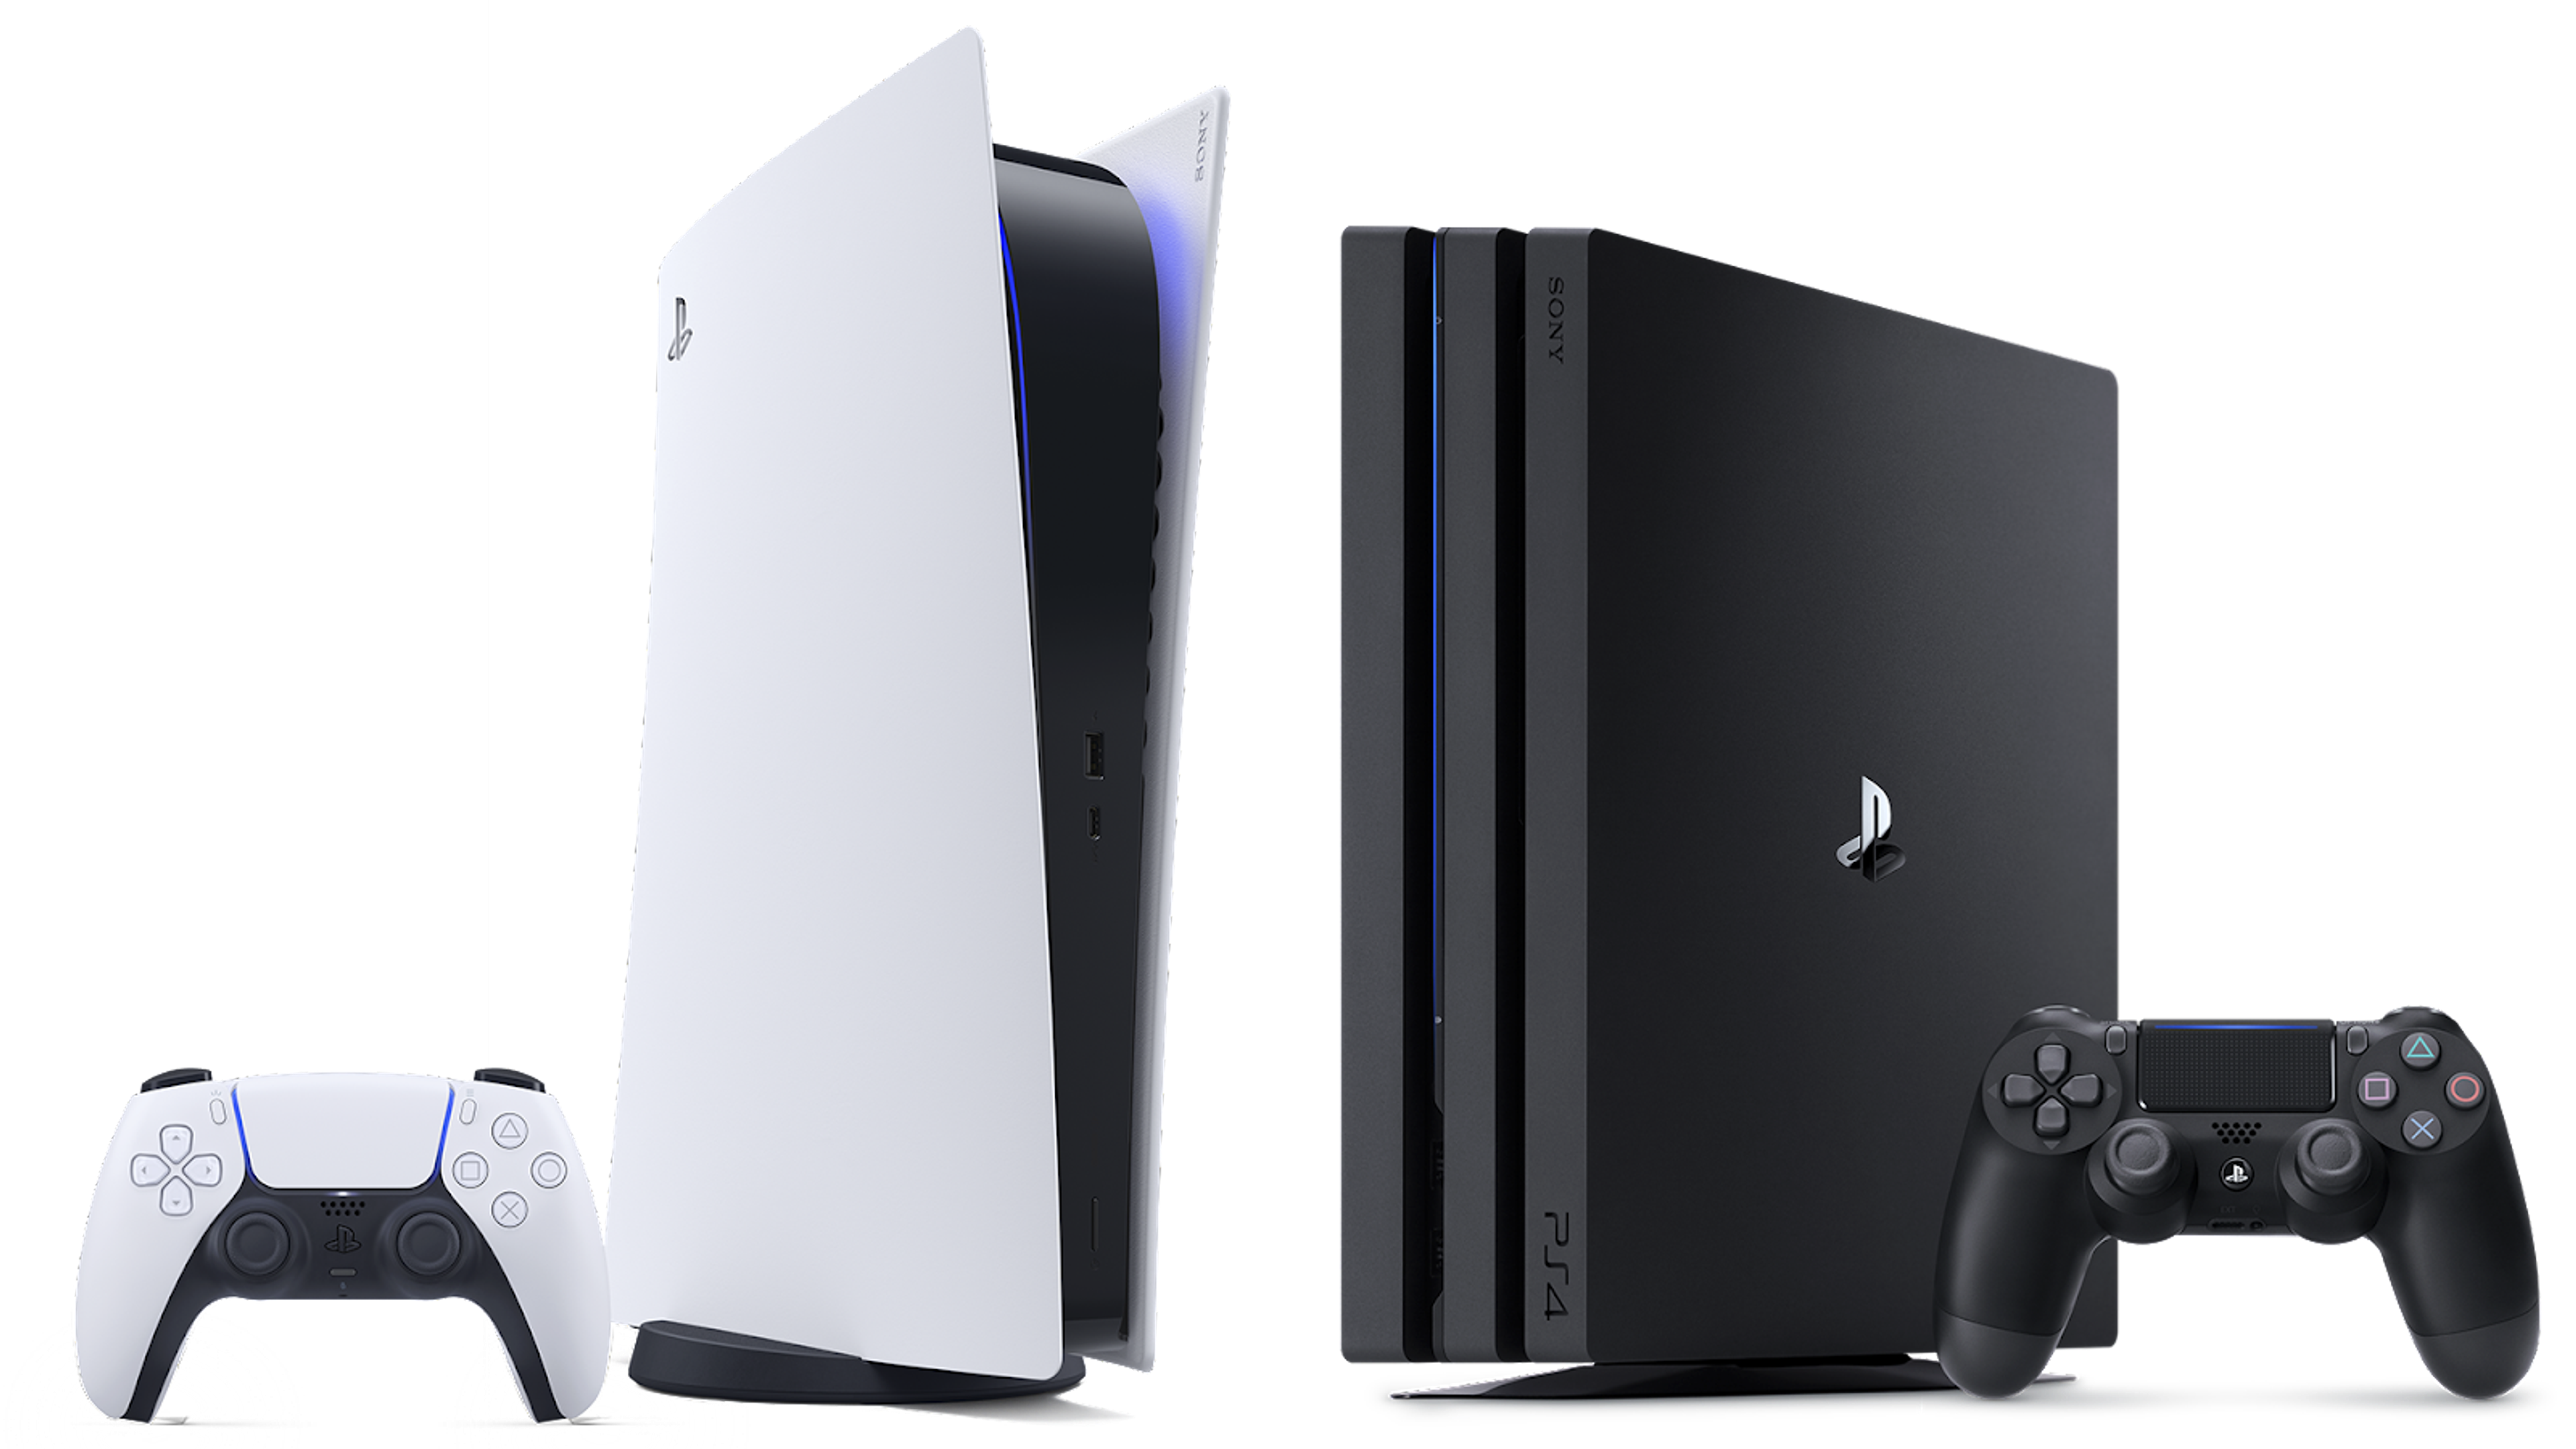 The PS5 and PS4 are one of the most successful consoles in history | Source